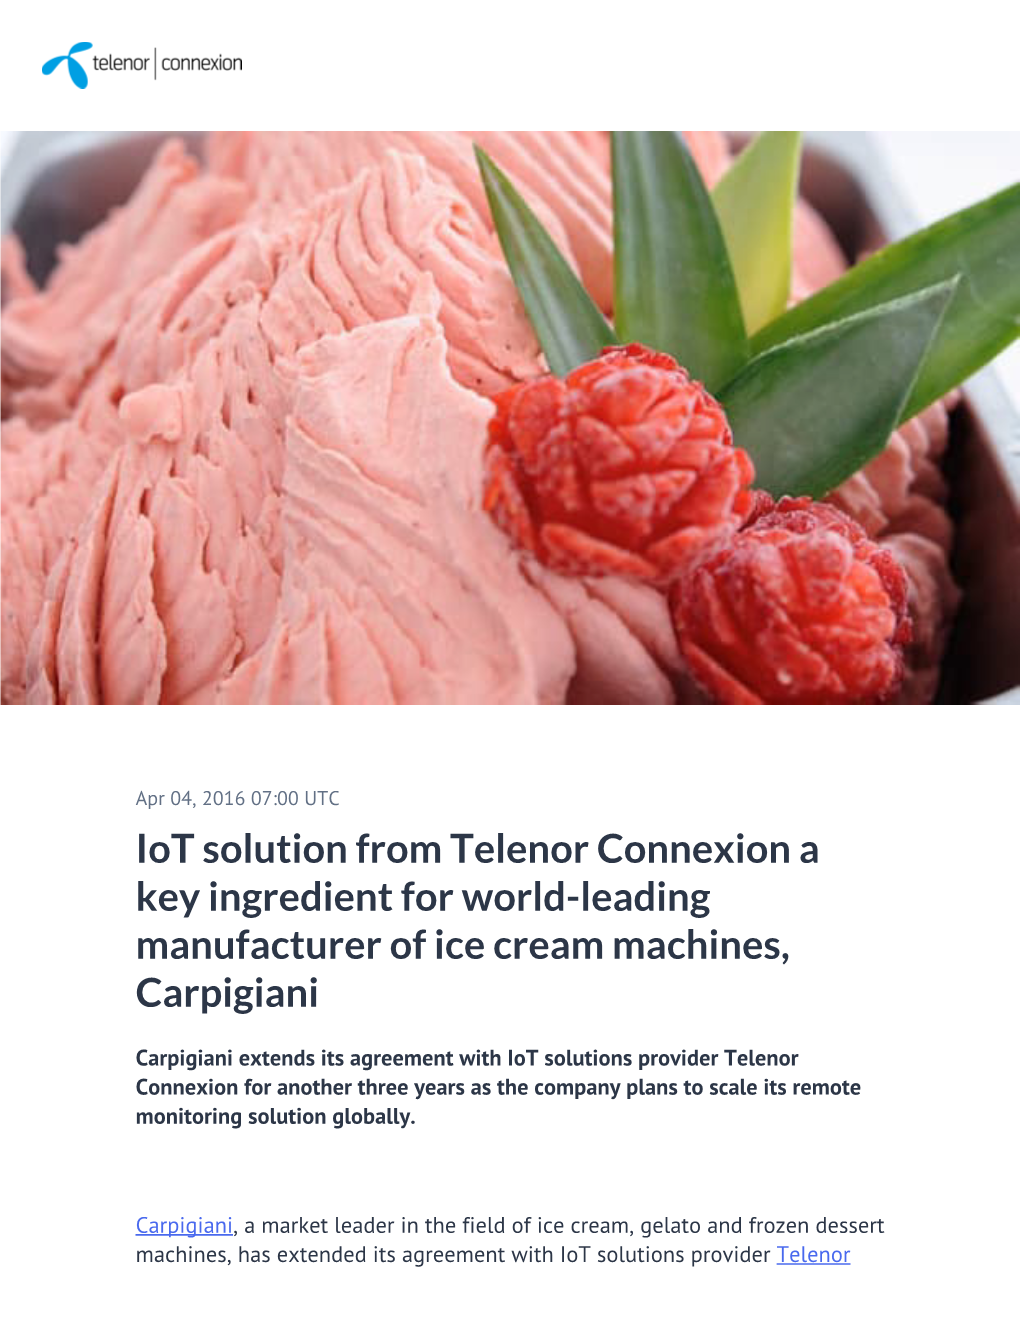 ​Iot Solution from Telenor Connexion a Key Ingredient for World-Leading